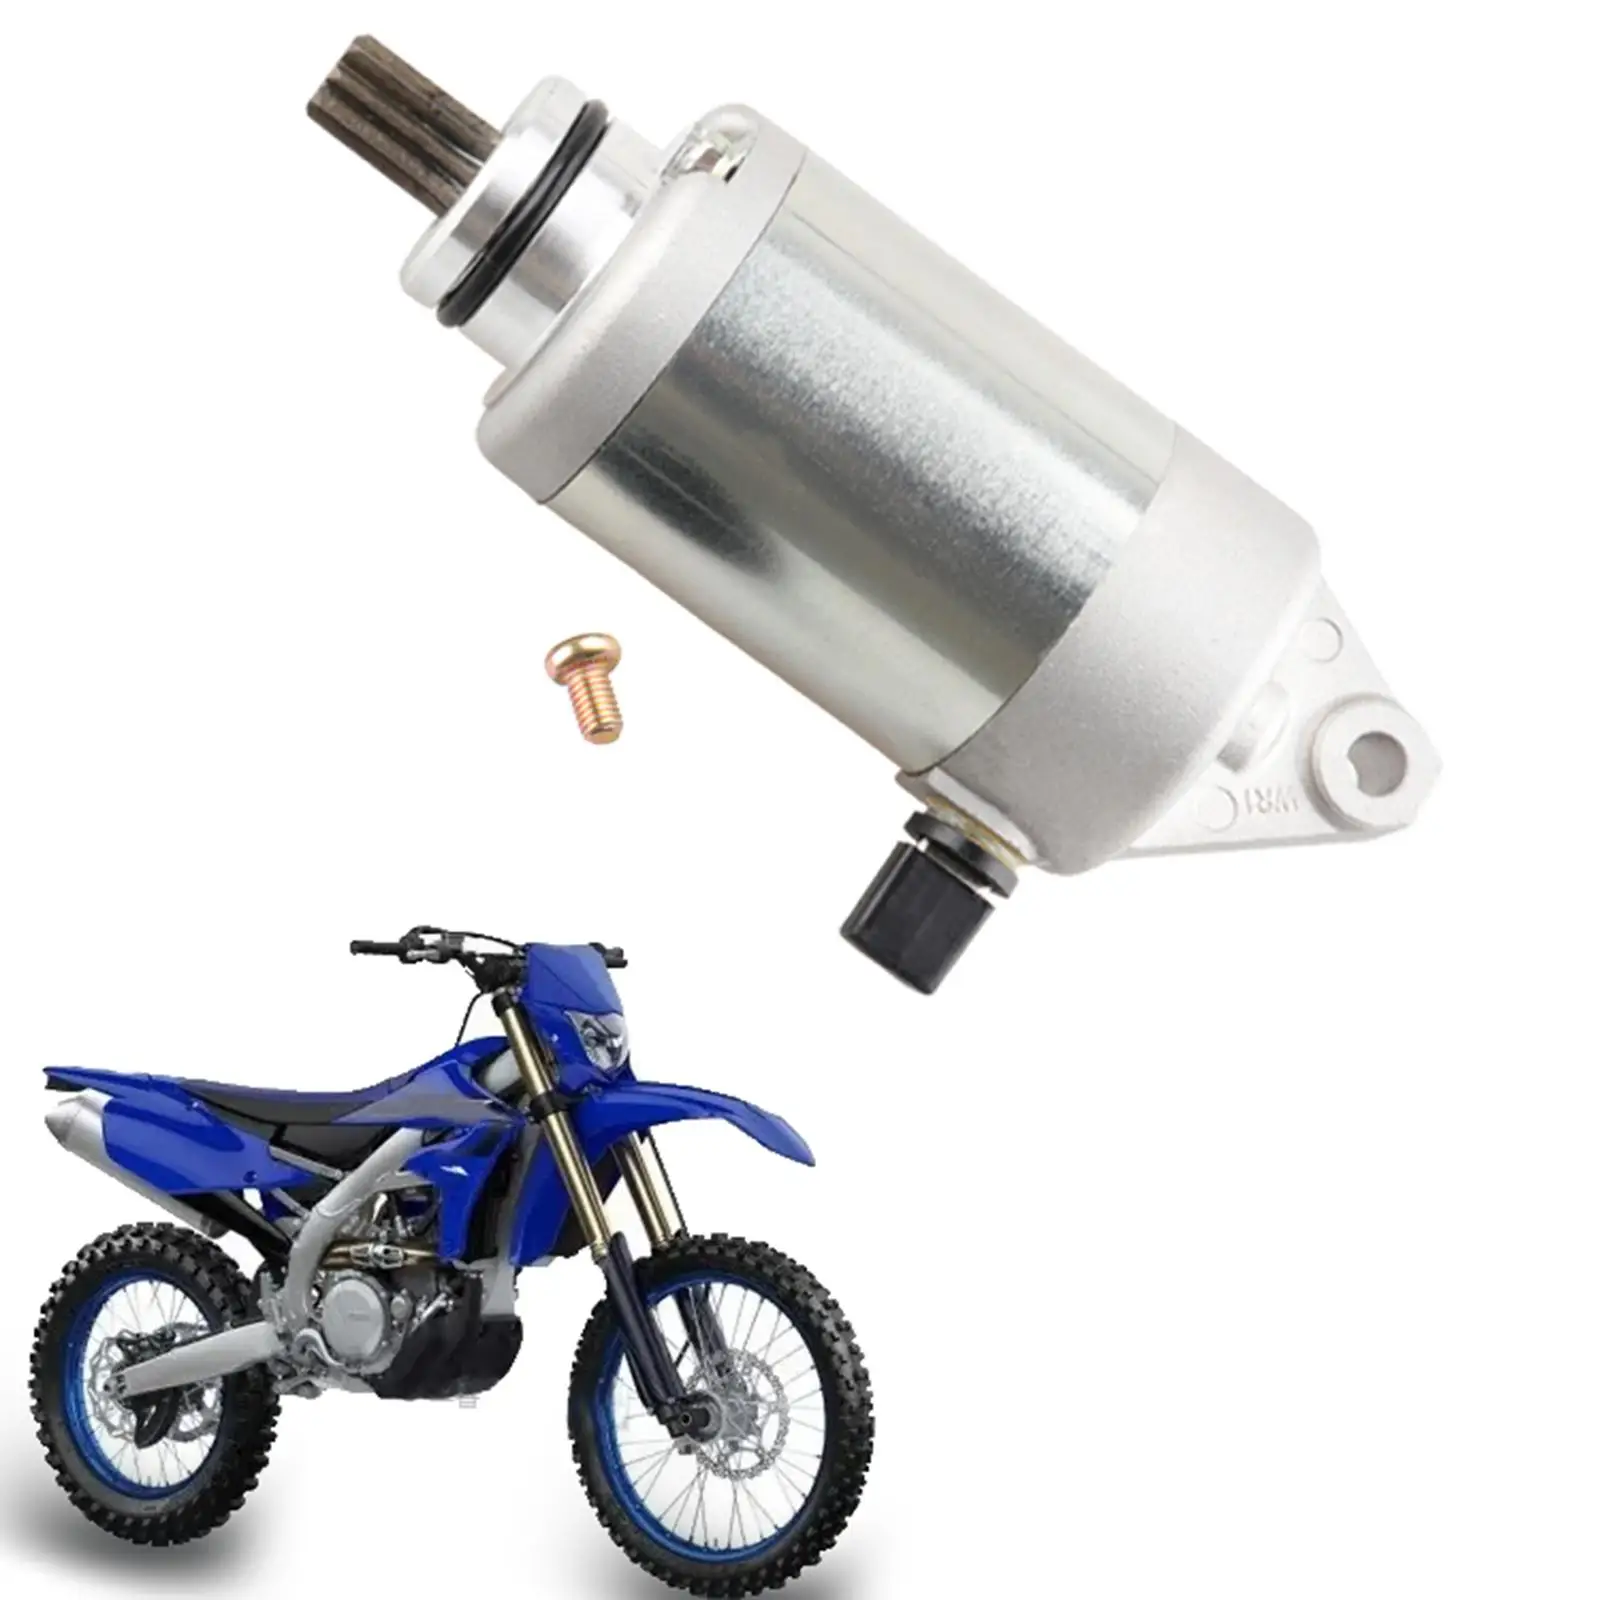 Starter Motor Replacement 2GB-81890-00 High Performance Accessories Easy Installation for Yamaha Yz250F Yz250FX Wr250F